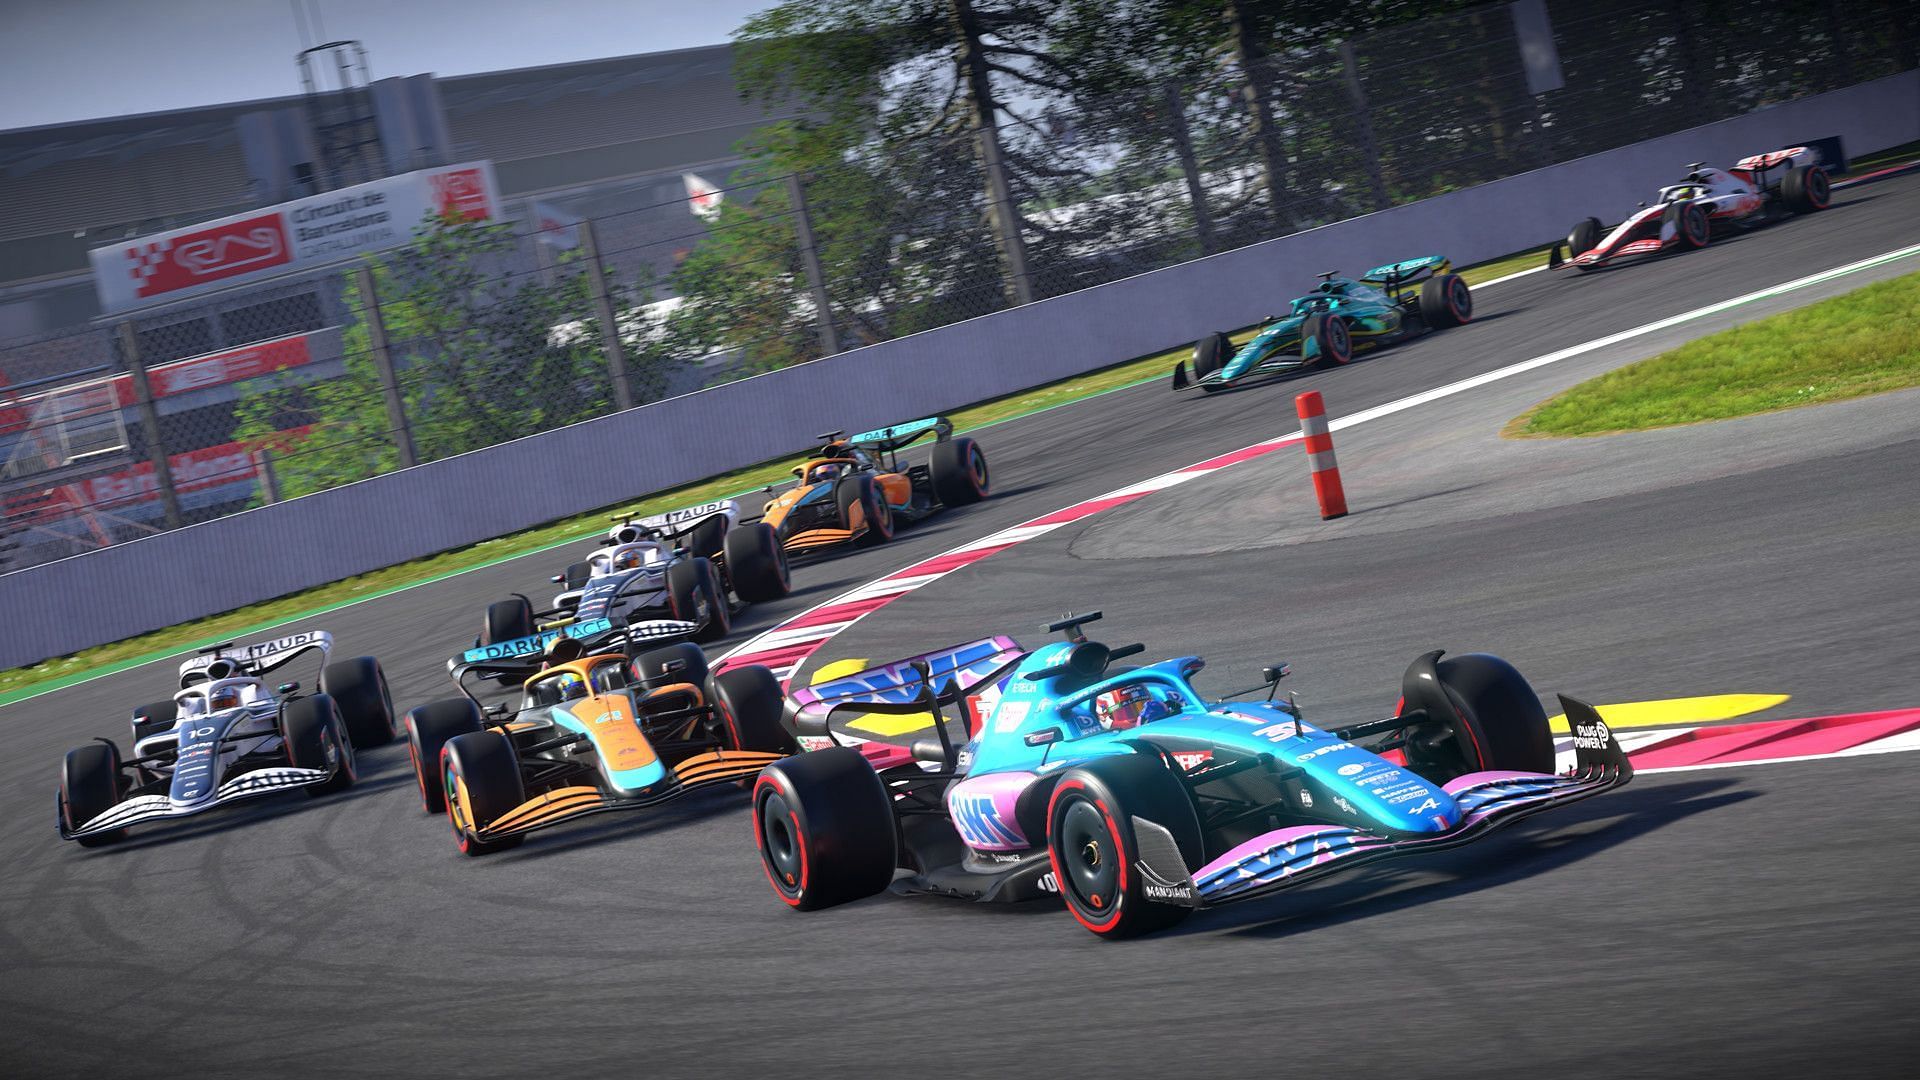 F1 22 Cross-Play Coming August End, Weekend Trials Announced